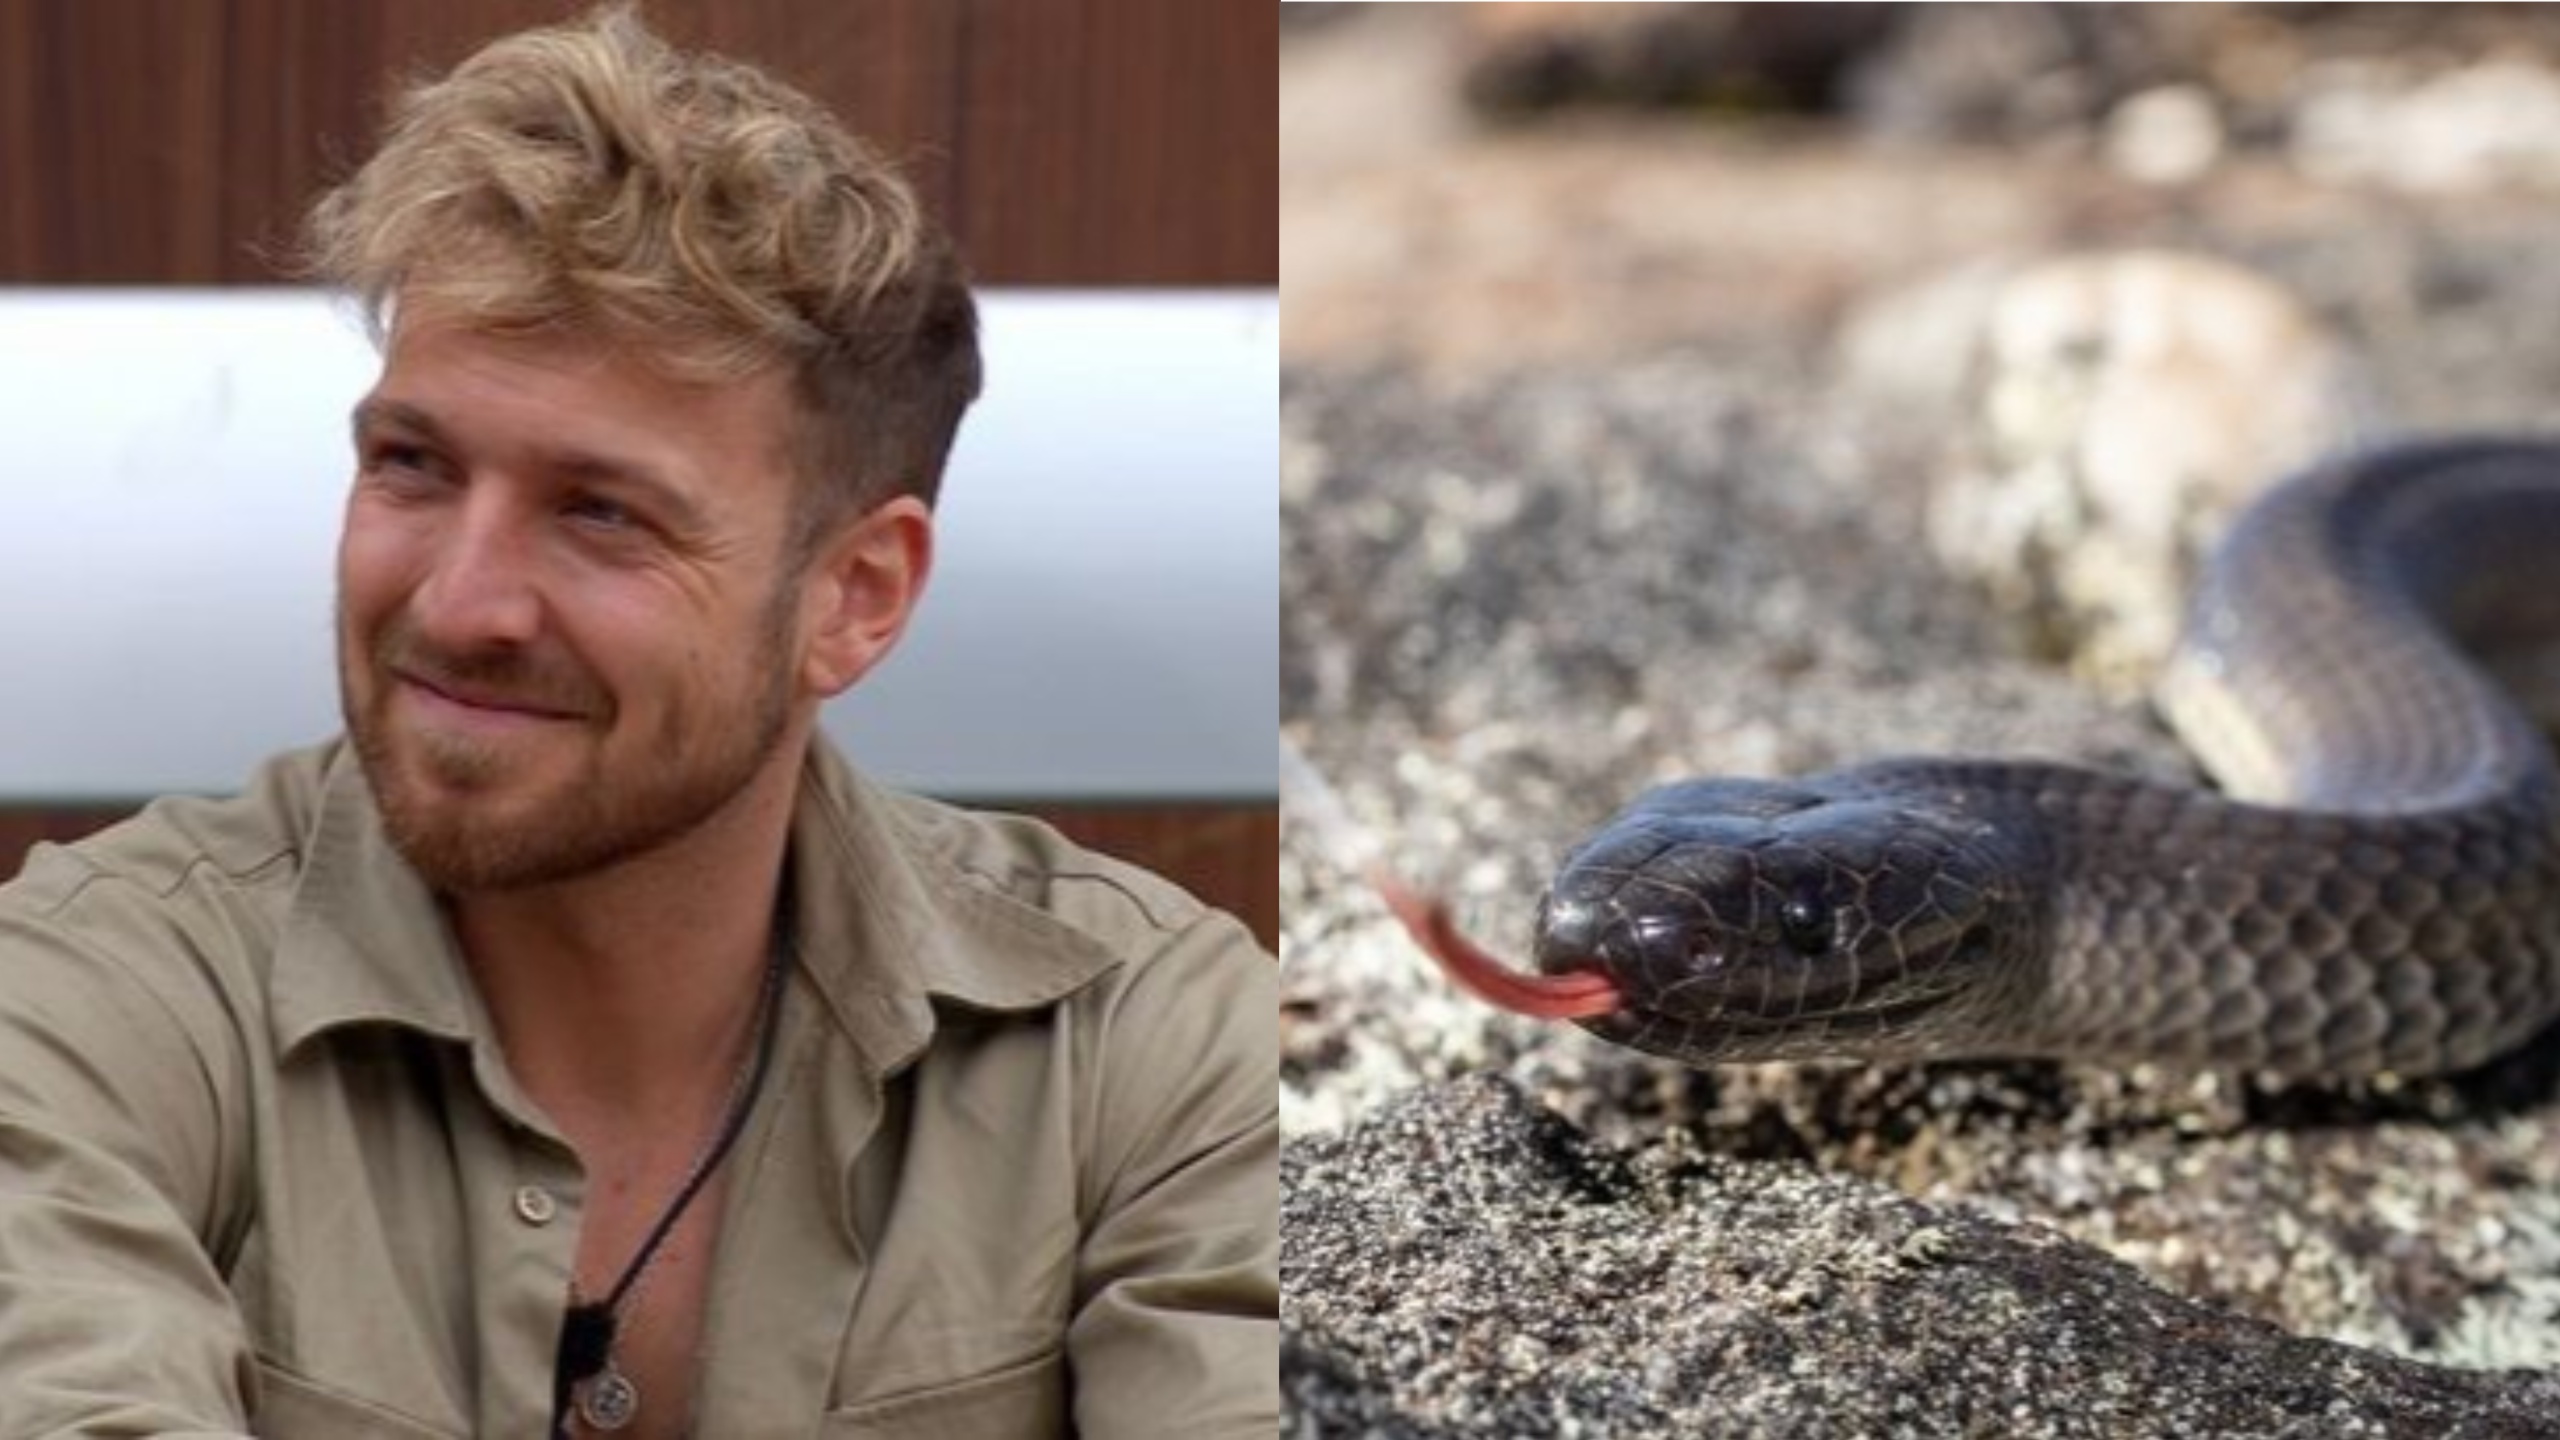 I'm A Celebrity ... Get Me Out Of Here! rangers have been forced to enter the camp after a venomous snake